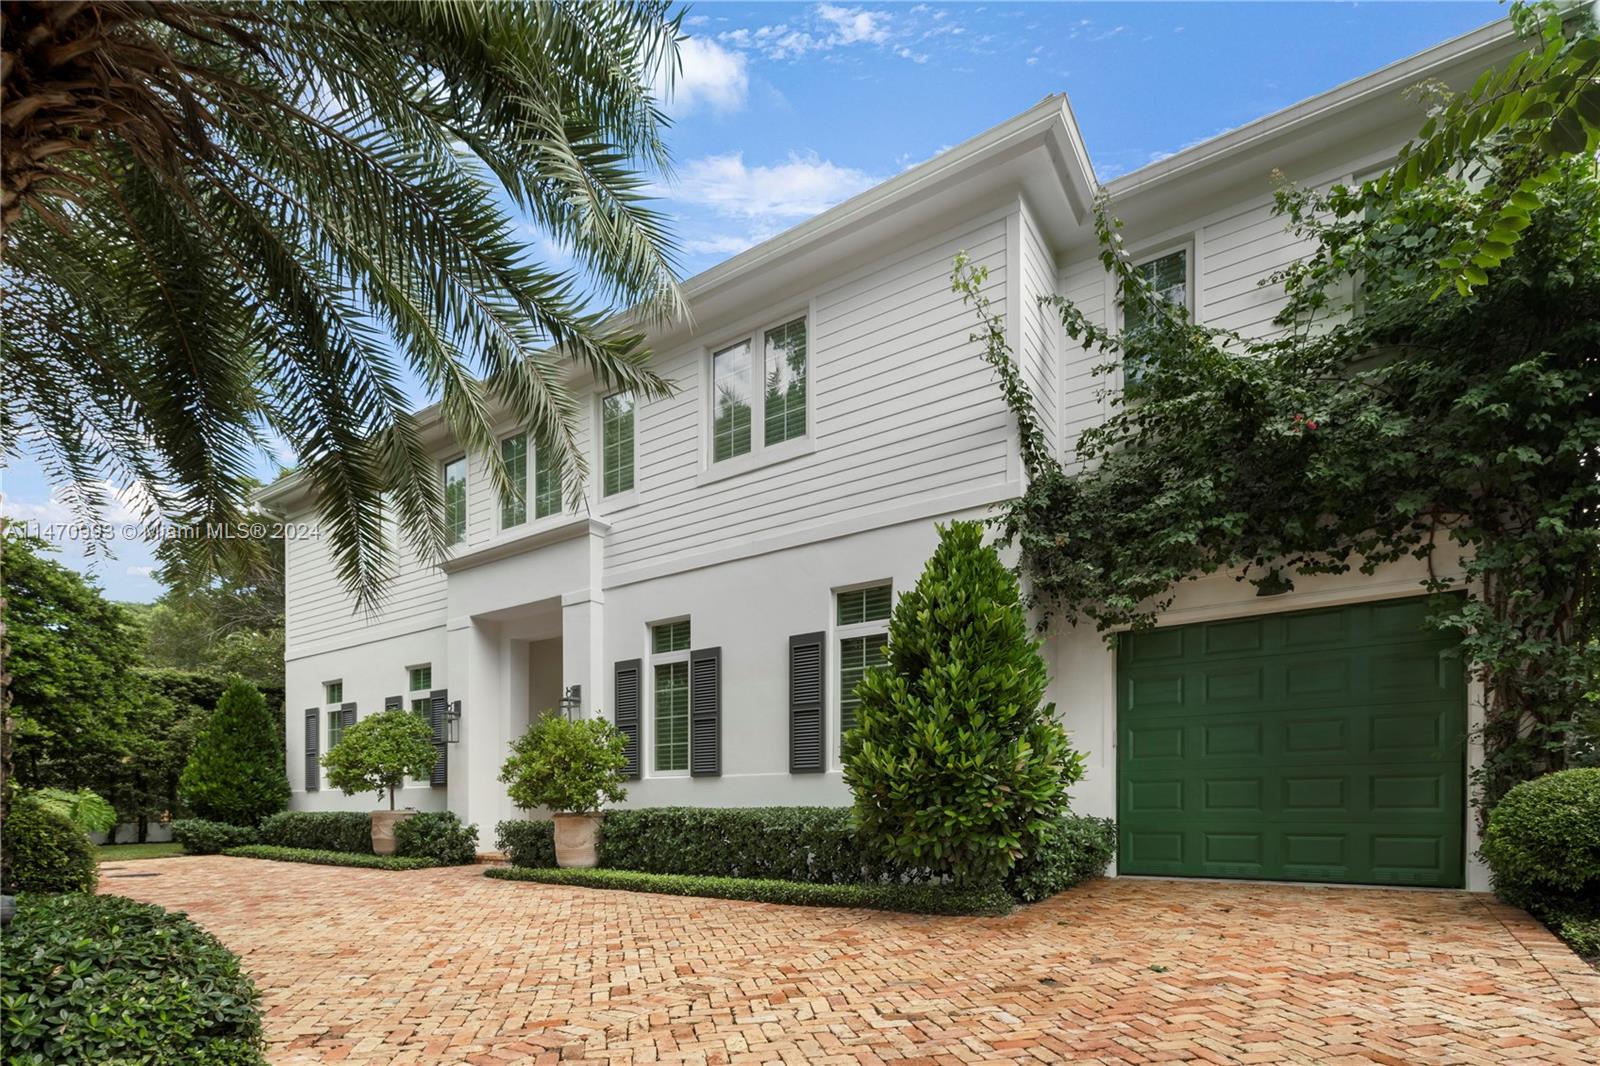 Experience unparalleled luxury in this one-of-a-kind 2018 colonial style home in Coral Gables. Situated on a gated corner lot, this 4 bed, 4.5 bath residence showcases exquisite finishes, including herringbone oak floors, custom Ornare kitchen cabinets and closets, top-of-the-line appliances including 48" Wolf gas range and Subzero refrigerator & freezer, water filtration system, full marble slabs and brass metals in the bathrooms. With a Creston system for automation, CGI Sentinel windows, and a Lynx BBQ set, this home effortlessly combines technology, security, and outdoor entertainment. Enjoy the heated/cooled pool, generator for uninterrupted comfort, and the tranquil Japanese Blueberry hedges. COMPETITIVE OWNER FINANCING UPON QUALIFICATIONS.